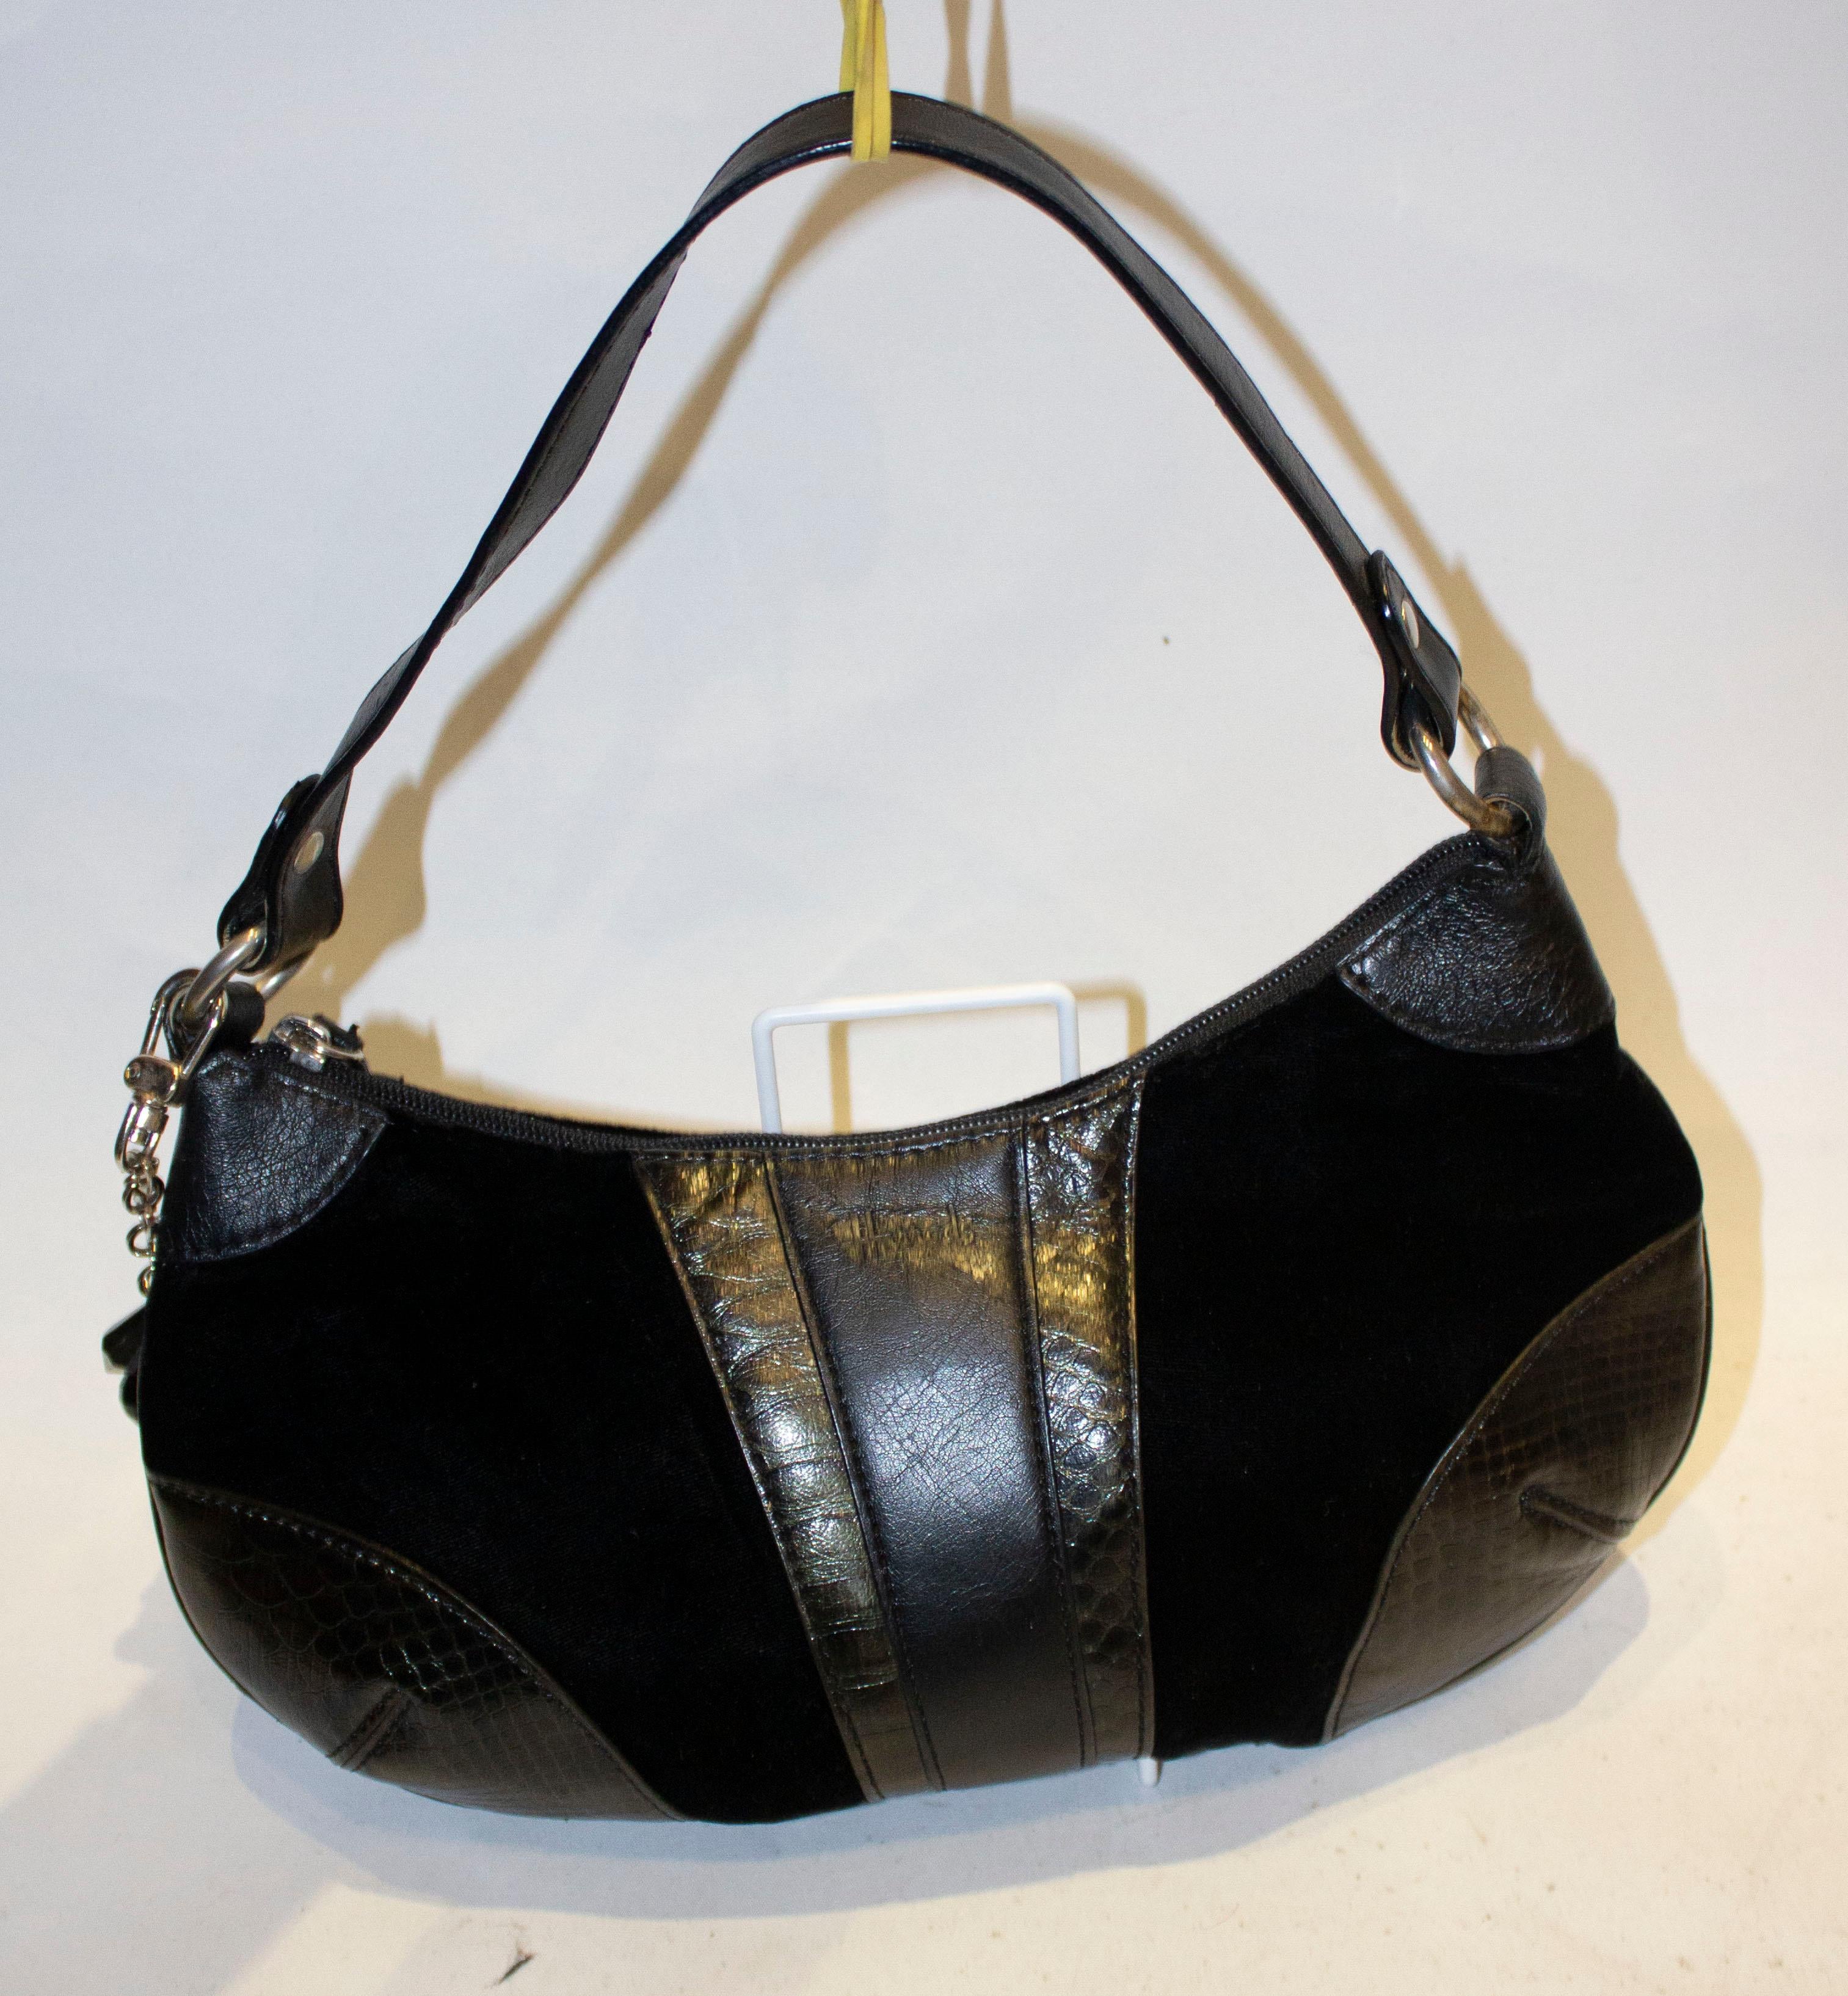 A chic vintage handbg by Harrods. The bag is made of black velvet with  snakeskin and leather trim. It has an internal zip pocket and top zip opening. The shoulder strap measures 18''.